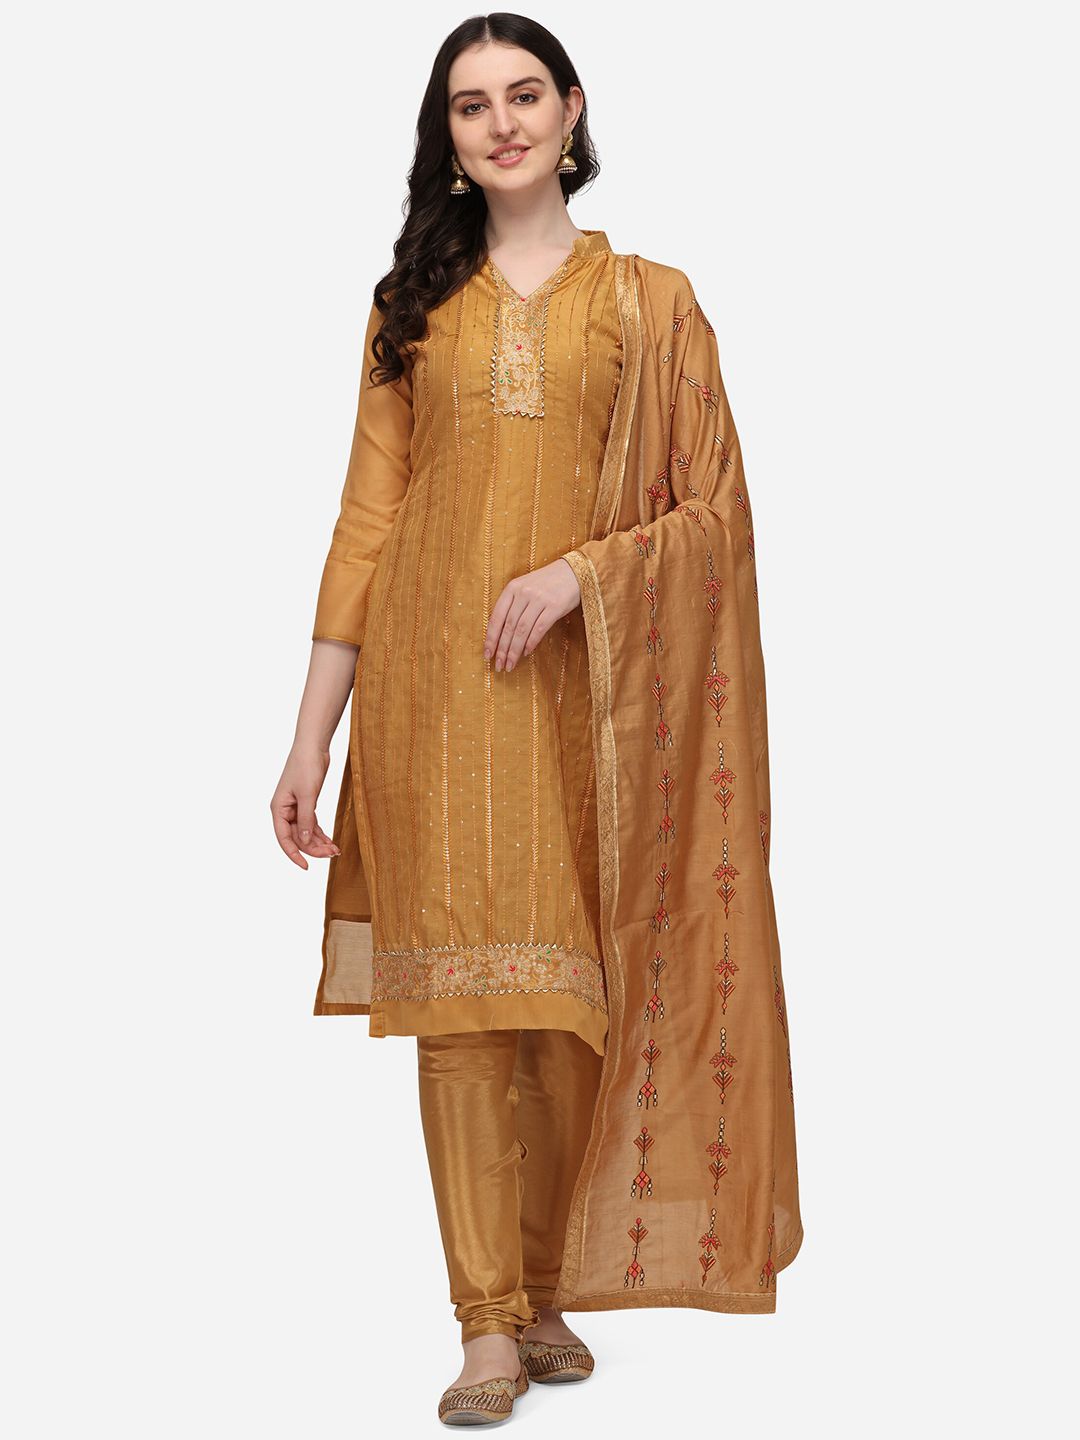 Mitera Cream-Coloured & Gold-Toned Embroidered Chanderi Unstitched Dress Material Price in India